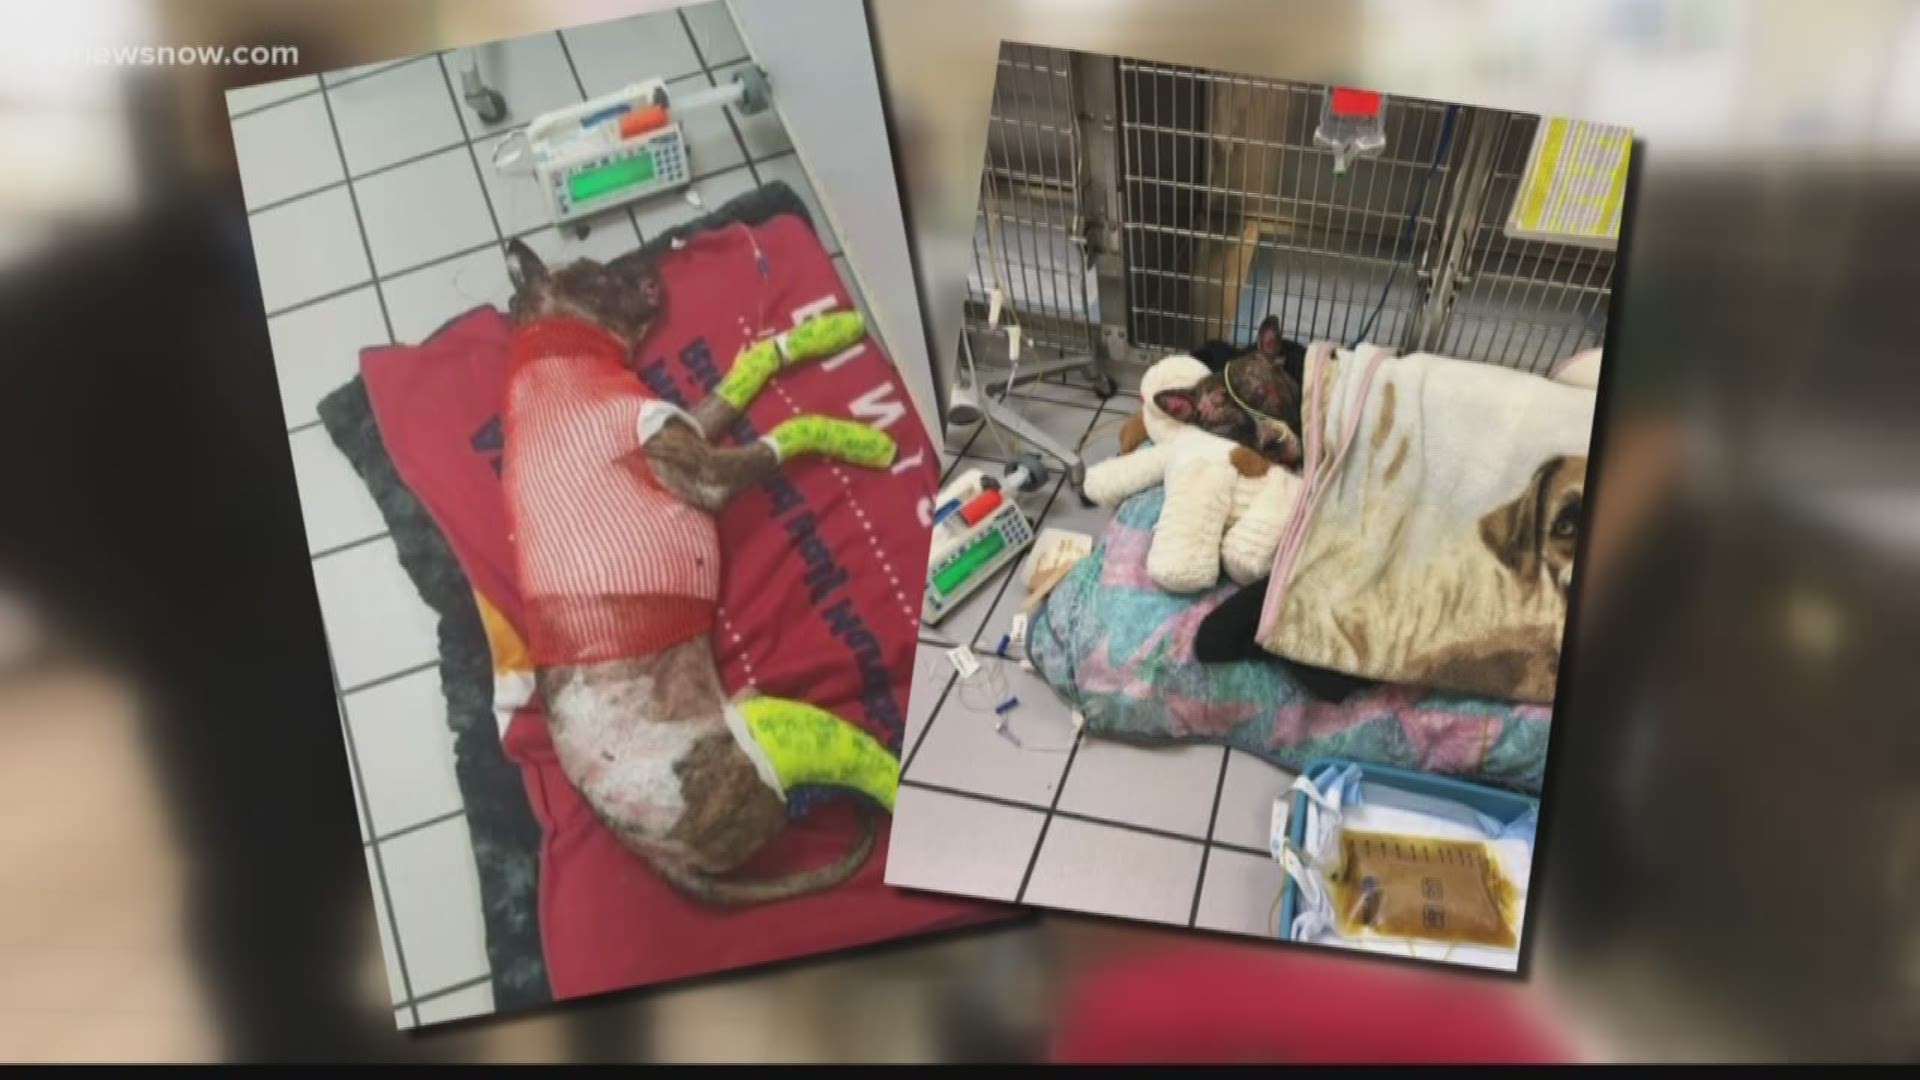 A bill is going through the Virginia General Assembly to make animal abuse punishments harsher.